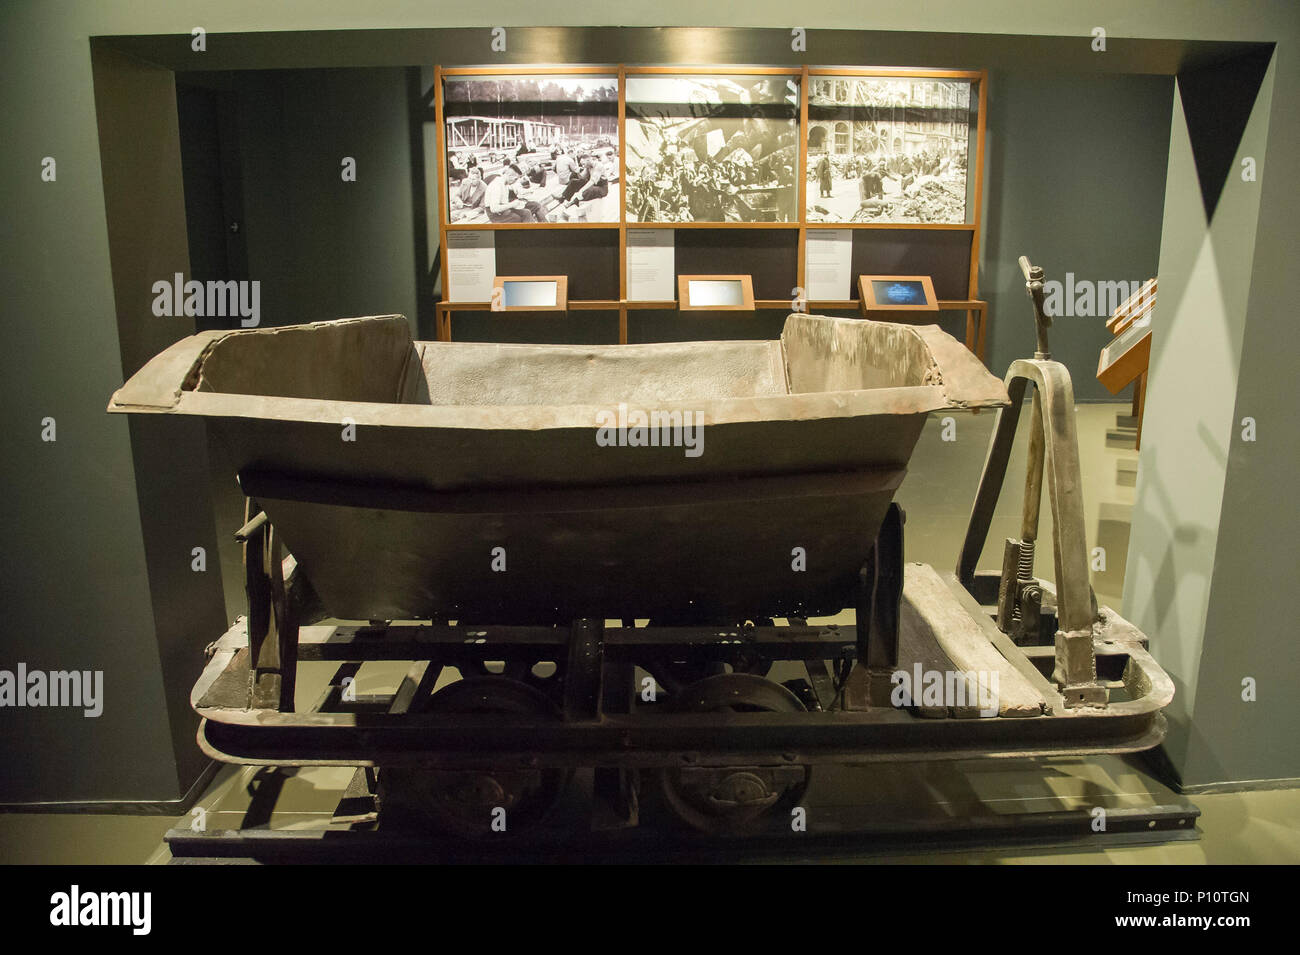 Quarry lorry and slave labour as a part of exhibion in Museum of the Second World War in Gdansk, Poland. January 23rd 2017  © Wojciech Strozyk / Alamy Stock Photo